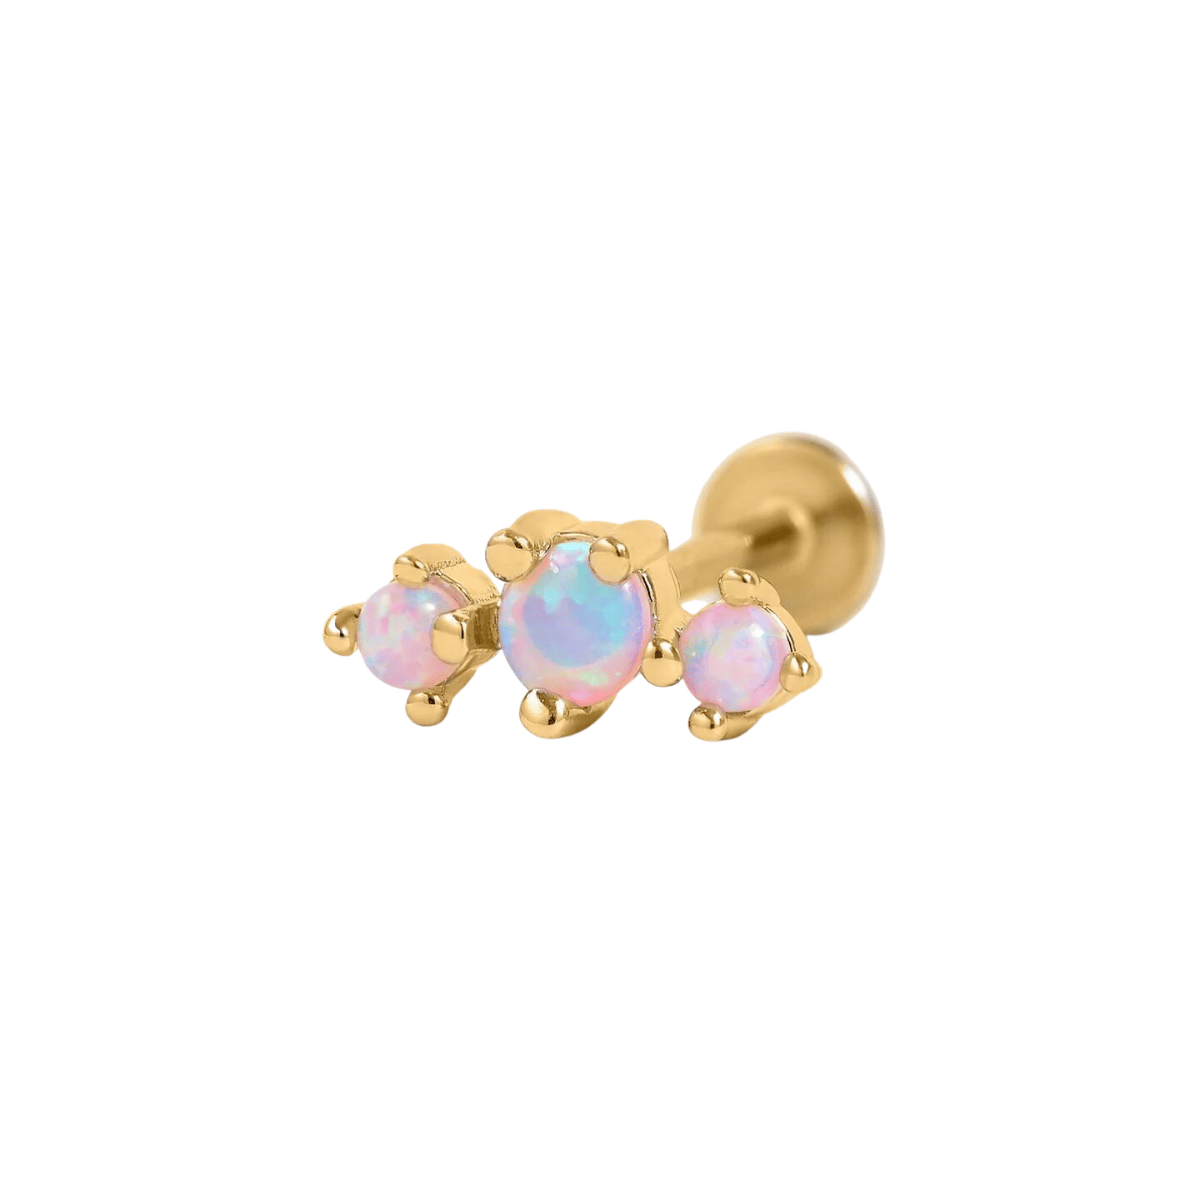 CURVED TRIPLE PINK OPAL PRONG PIERCING EARRING (18G)